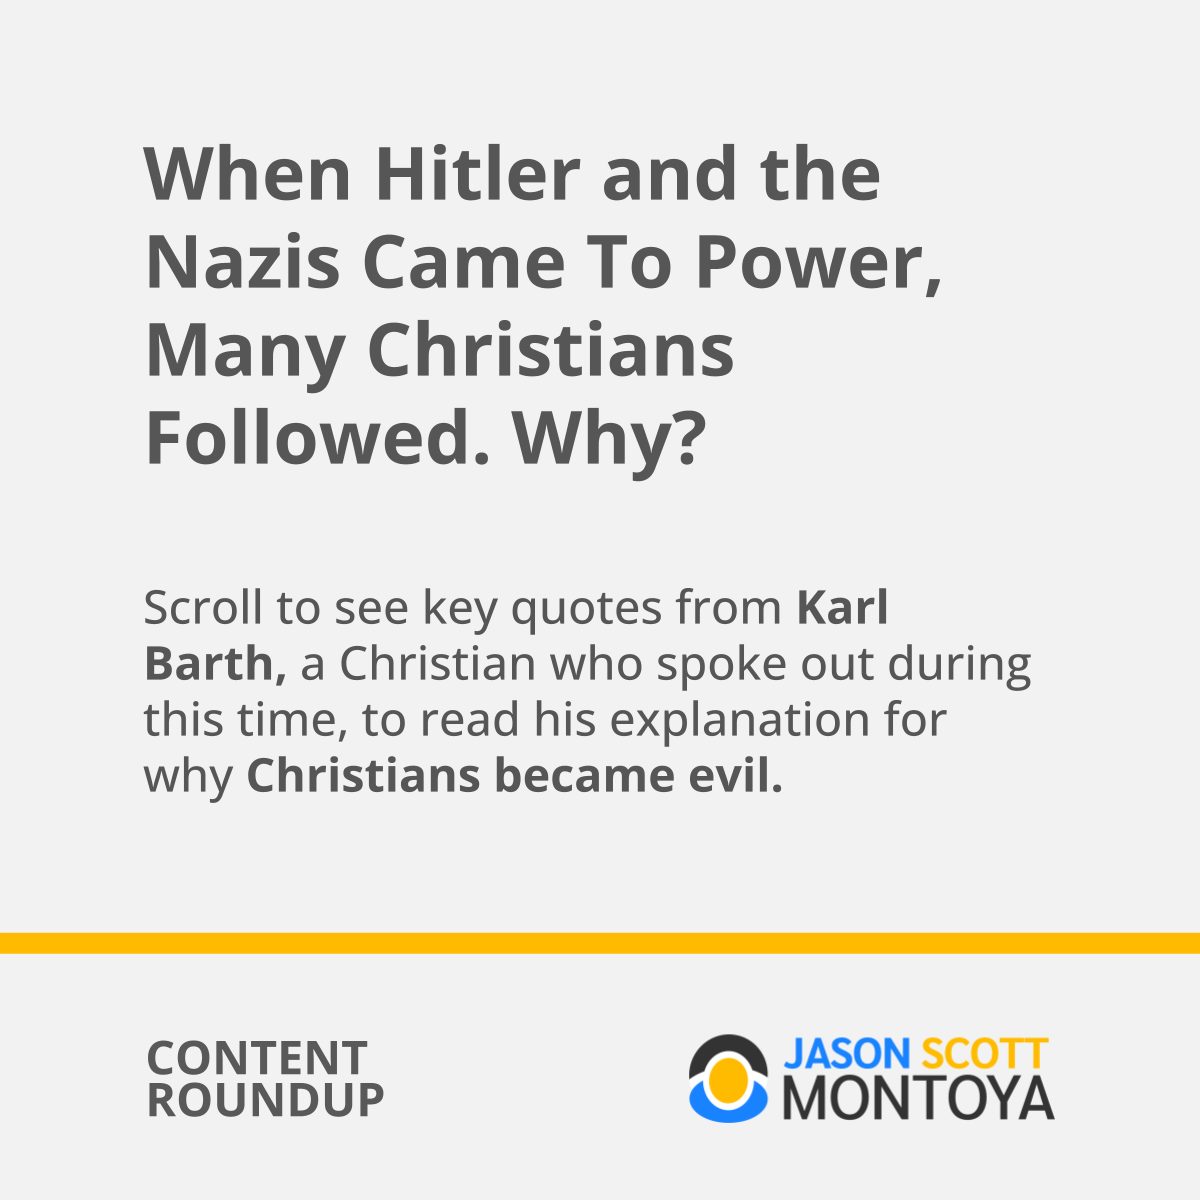 When Hitler and the Nazis Came To Power, Many Christians Followed. Why?  Scroll to see key quotes from Karl Barth, a Christian who spoke out during this time, to read his explanation for why Christians became evil.